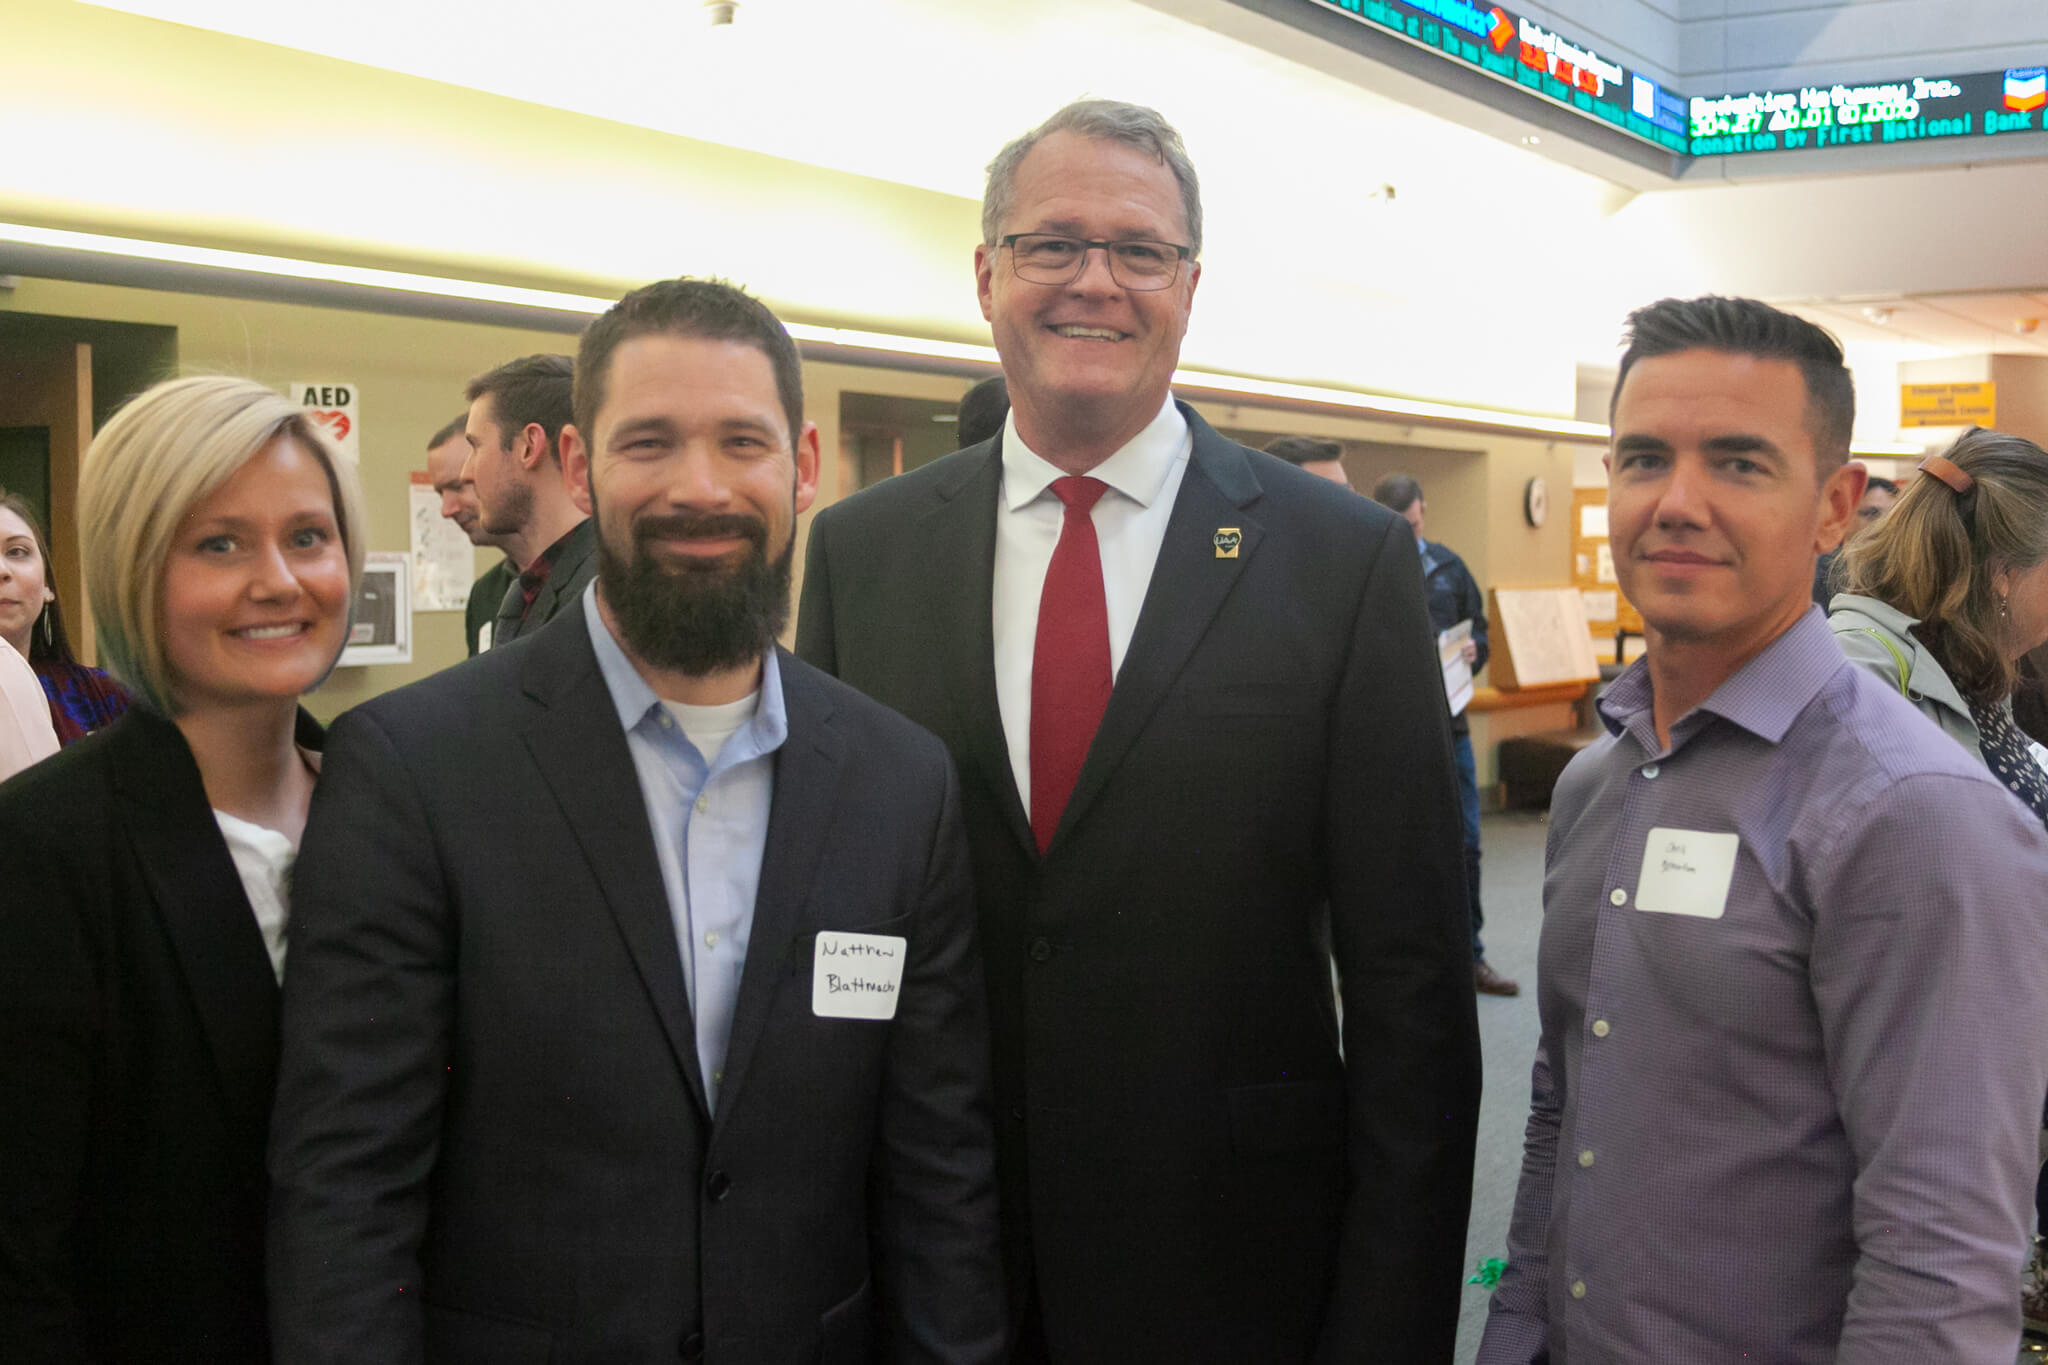 Emily Blattmachr, BA ‘09 English; Matthew Blattmachr, BBA ‘08 Global Logistics; John Nofsinger, Dean of the College; and Chris Yelverton, Key Bank, at the College of Business and Public Policy Showcase, August 2022.